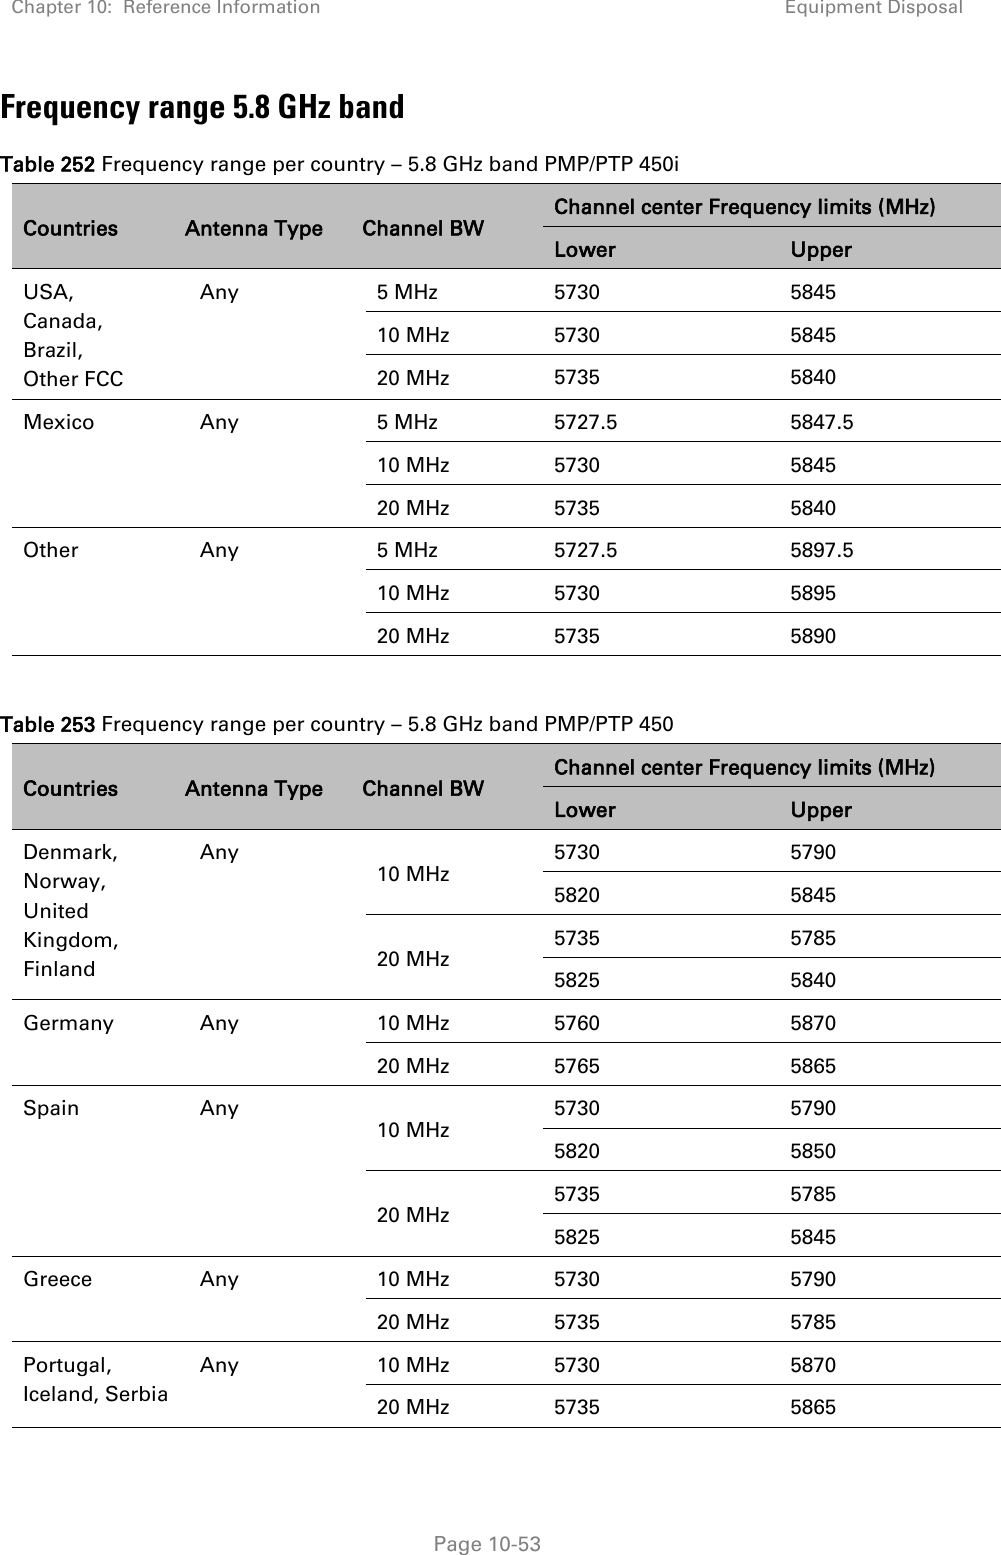 Chapter 10:  Reference Information Equipment Disposal   Page 10-53 Frequency range 5.8 GHz band Table 252 Frequency range per country – 5.8 GHz band PMP/PTP 450i Countries Antenna Type Channel BW Channel center Frequency limits (MHz) Lower Upper USA,  Canada, Brazil,  Other FCC Any 5 MHz 5730 5845 10 MHz 5730 5845 20 MHz 5735 5840 Mexico Any 5 MHz 5727.5 5847.5 10 MHz 5730 5845 20 MHz 5735 5840 Other Any 5 MHz 5727.5 5897.5 10 MHz 5730 5895 20 MHz 5735 5890  Table 253 Frequency range per country – 5.8 GHz band PMP/PTP 450 Countries Antenna Type Channel BW Channel center Frequency limits (MHz) Lower Upper Denmark, Norway, United Kingdom, Finland Any 10 MHz 5730 5790 5820 5845 20 MHz 5735 5785 5825 5840 Germany Any 10 MHz 5760 5870 20 MHz 5765 5865 Spain Any 10 MHz 5730 5790 5820 5850 20 MHz 5735 5785 5825 5845 Greece Any 10 MHz 5730 5790 20 MHz 5735 5785 Portugal, Iceland, Serbia Any 10 MHz 5730 5870 20 MHz 5735 5865 